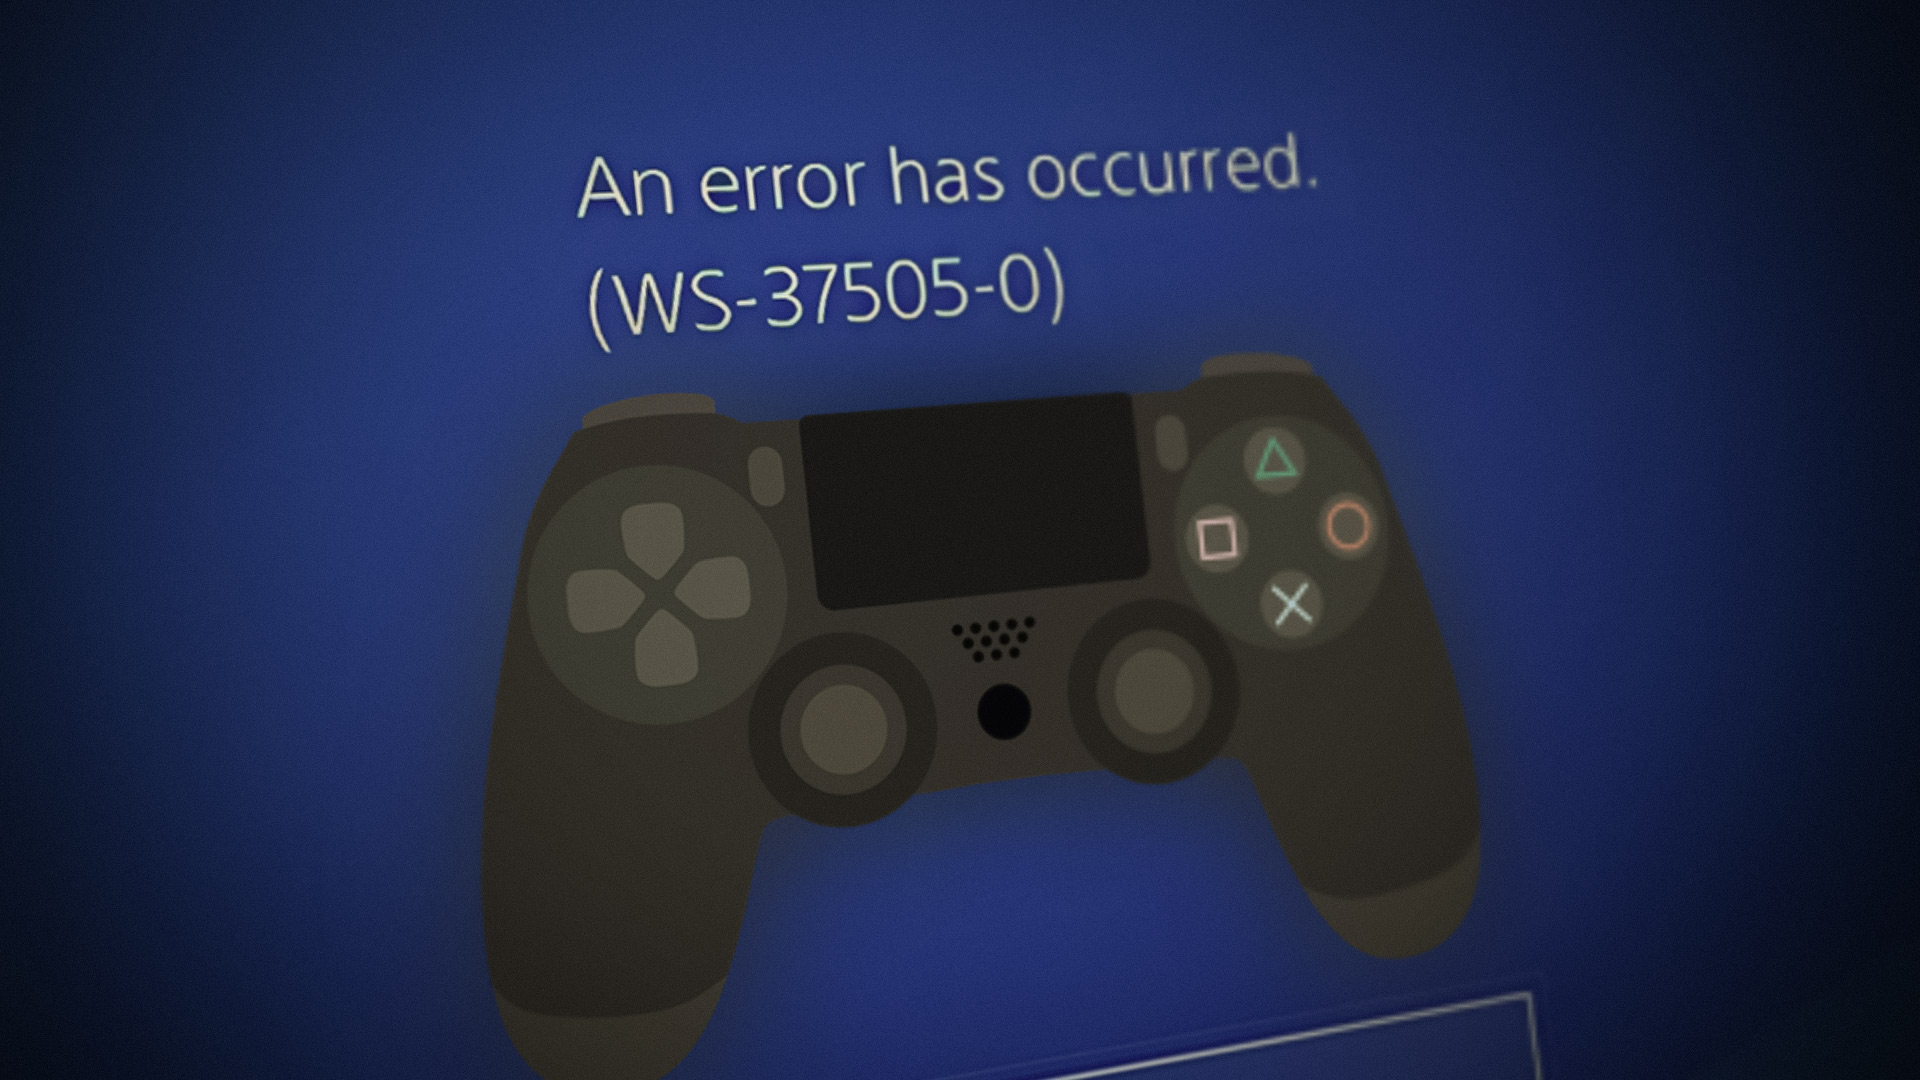 How to Fix Error Code WS-37505-0 on PlayStation?